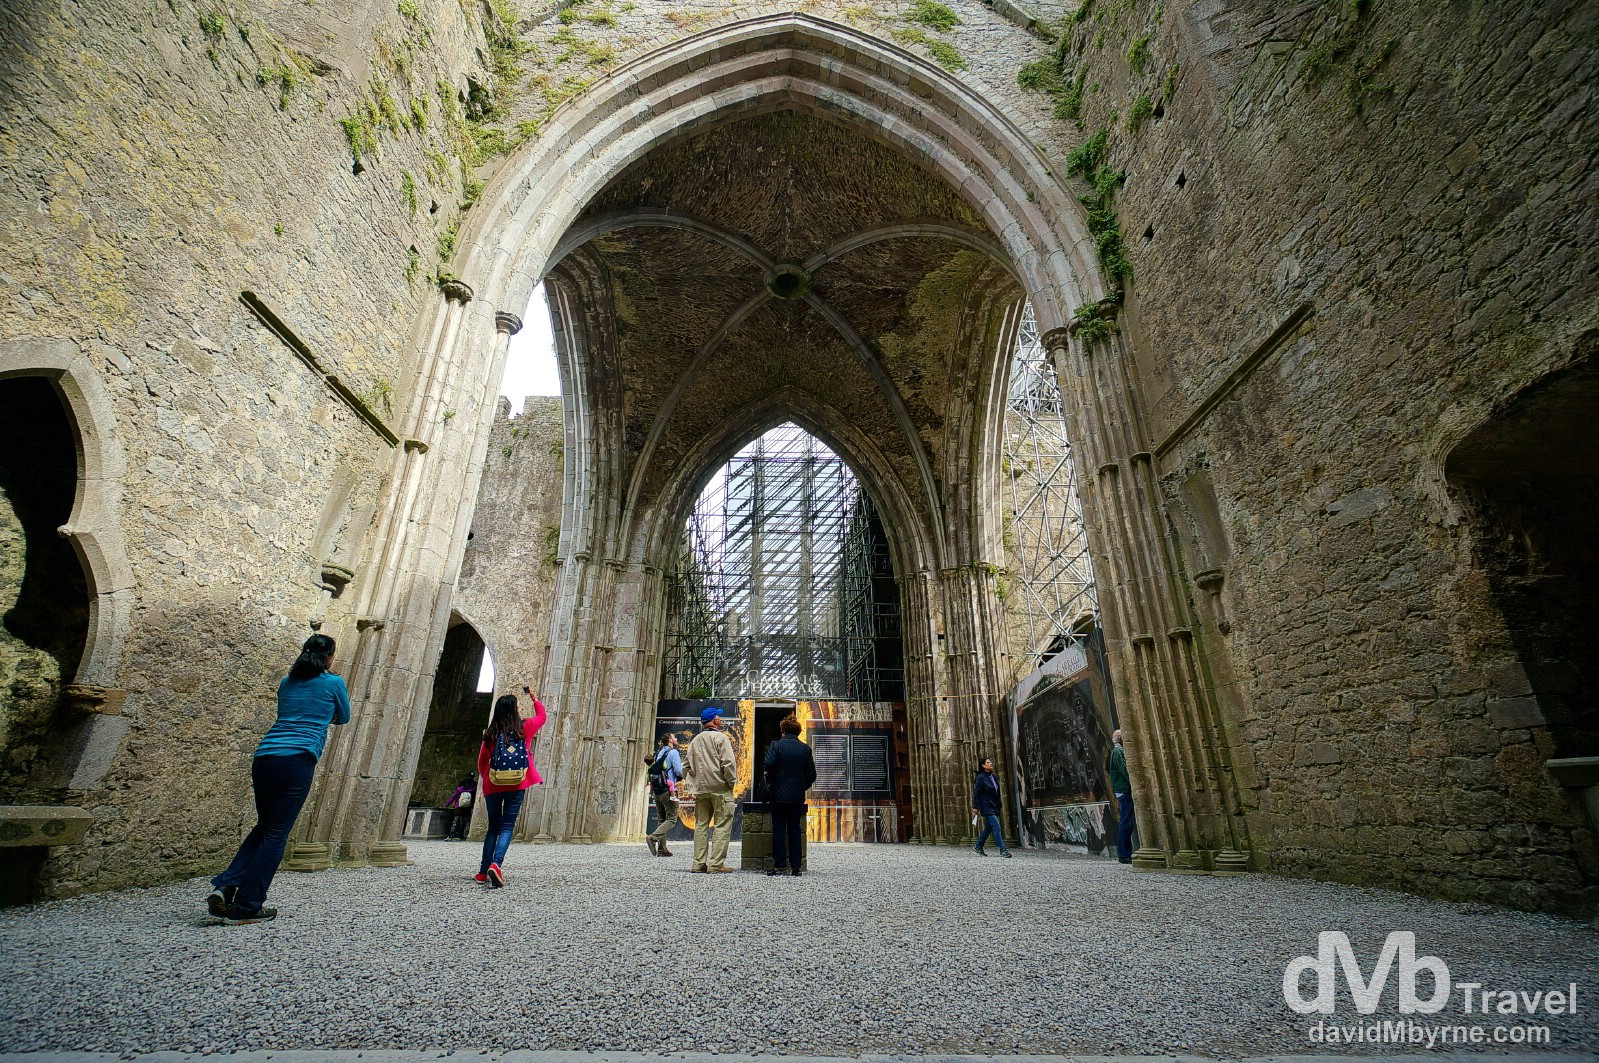 Inside the 13th century Gothic Cathedral of the Rock of Cashel, Cashel, Co. Tipperary, Ireland. August 30, 2014.